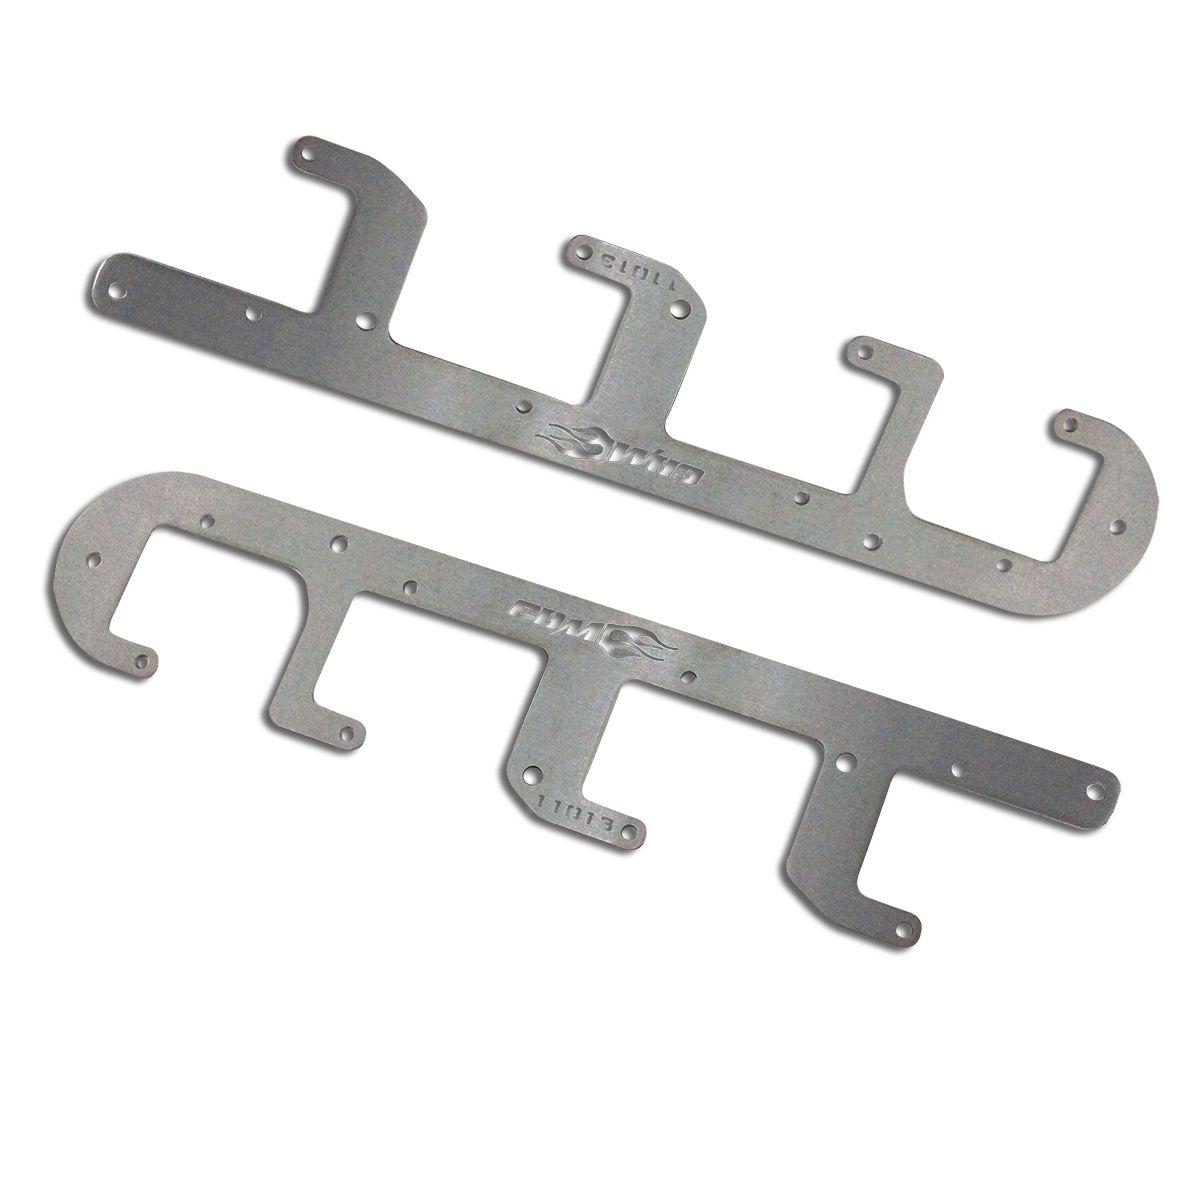 CBM Replacement Brushed Stainless Steel LS1 / LS6 Coil Brackets, C5 Corvette and Camaro